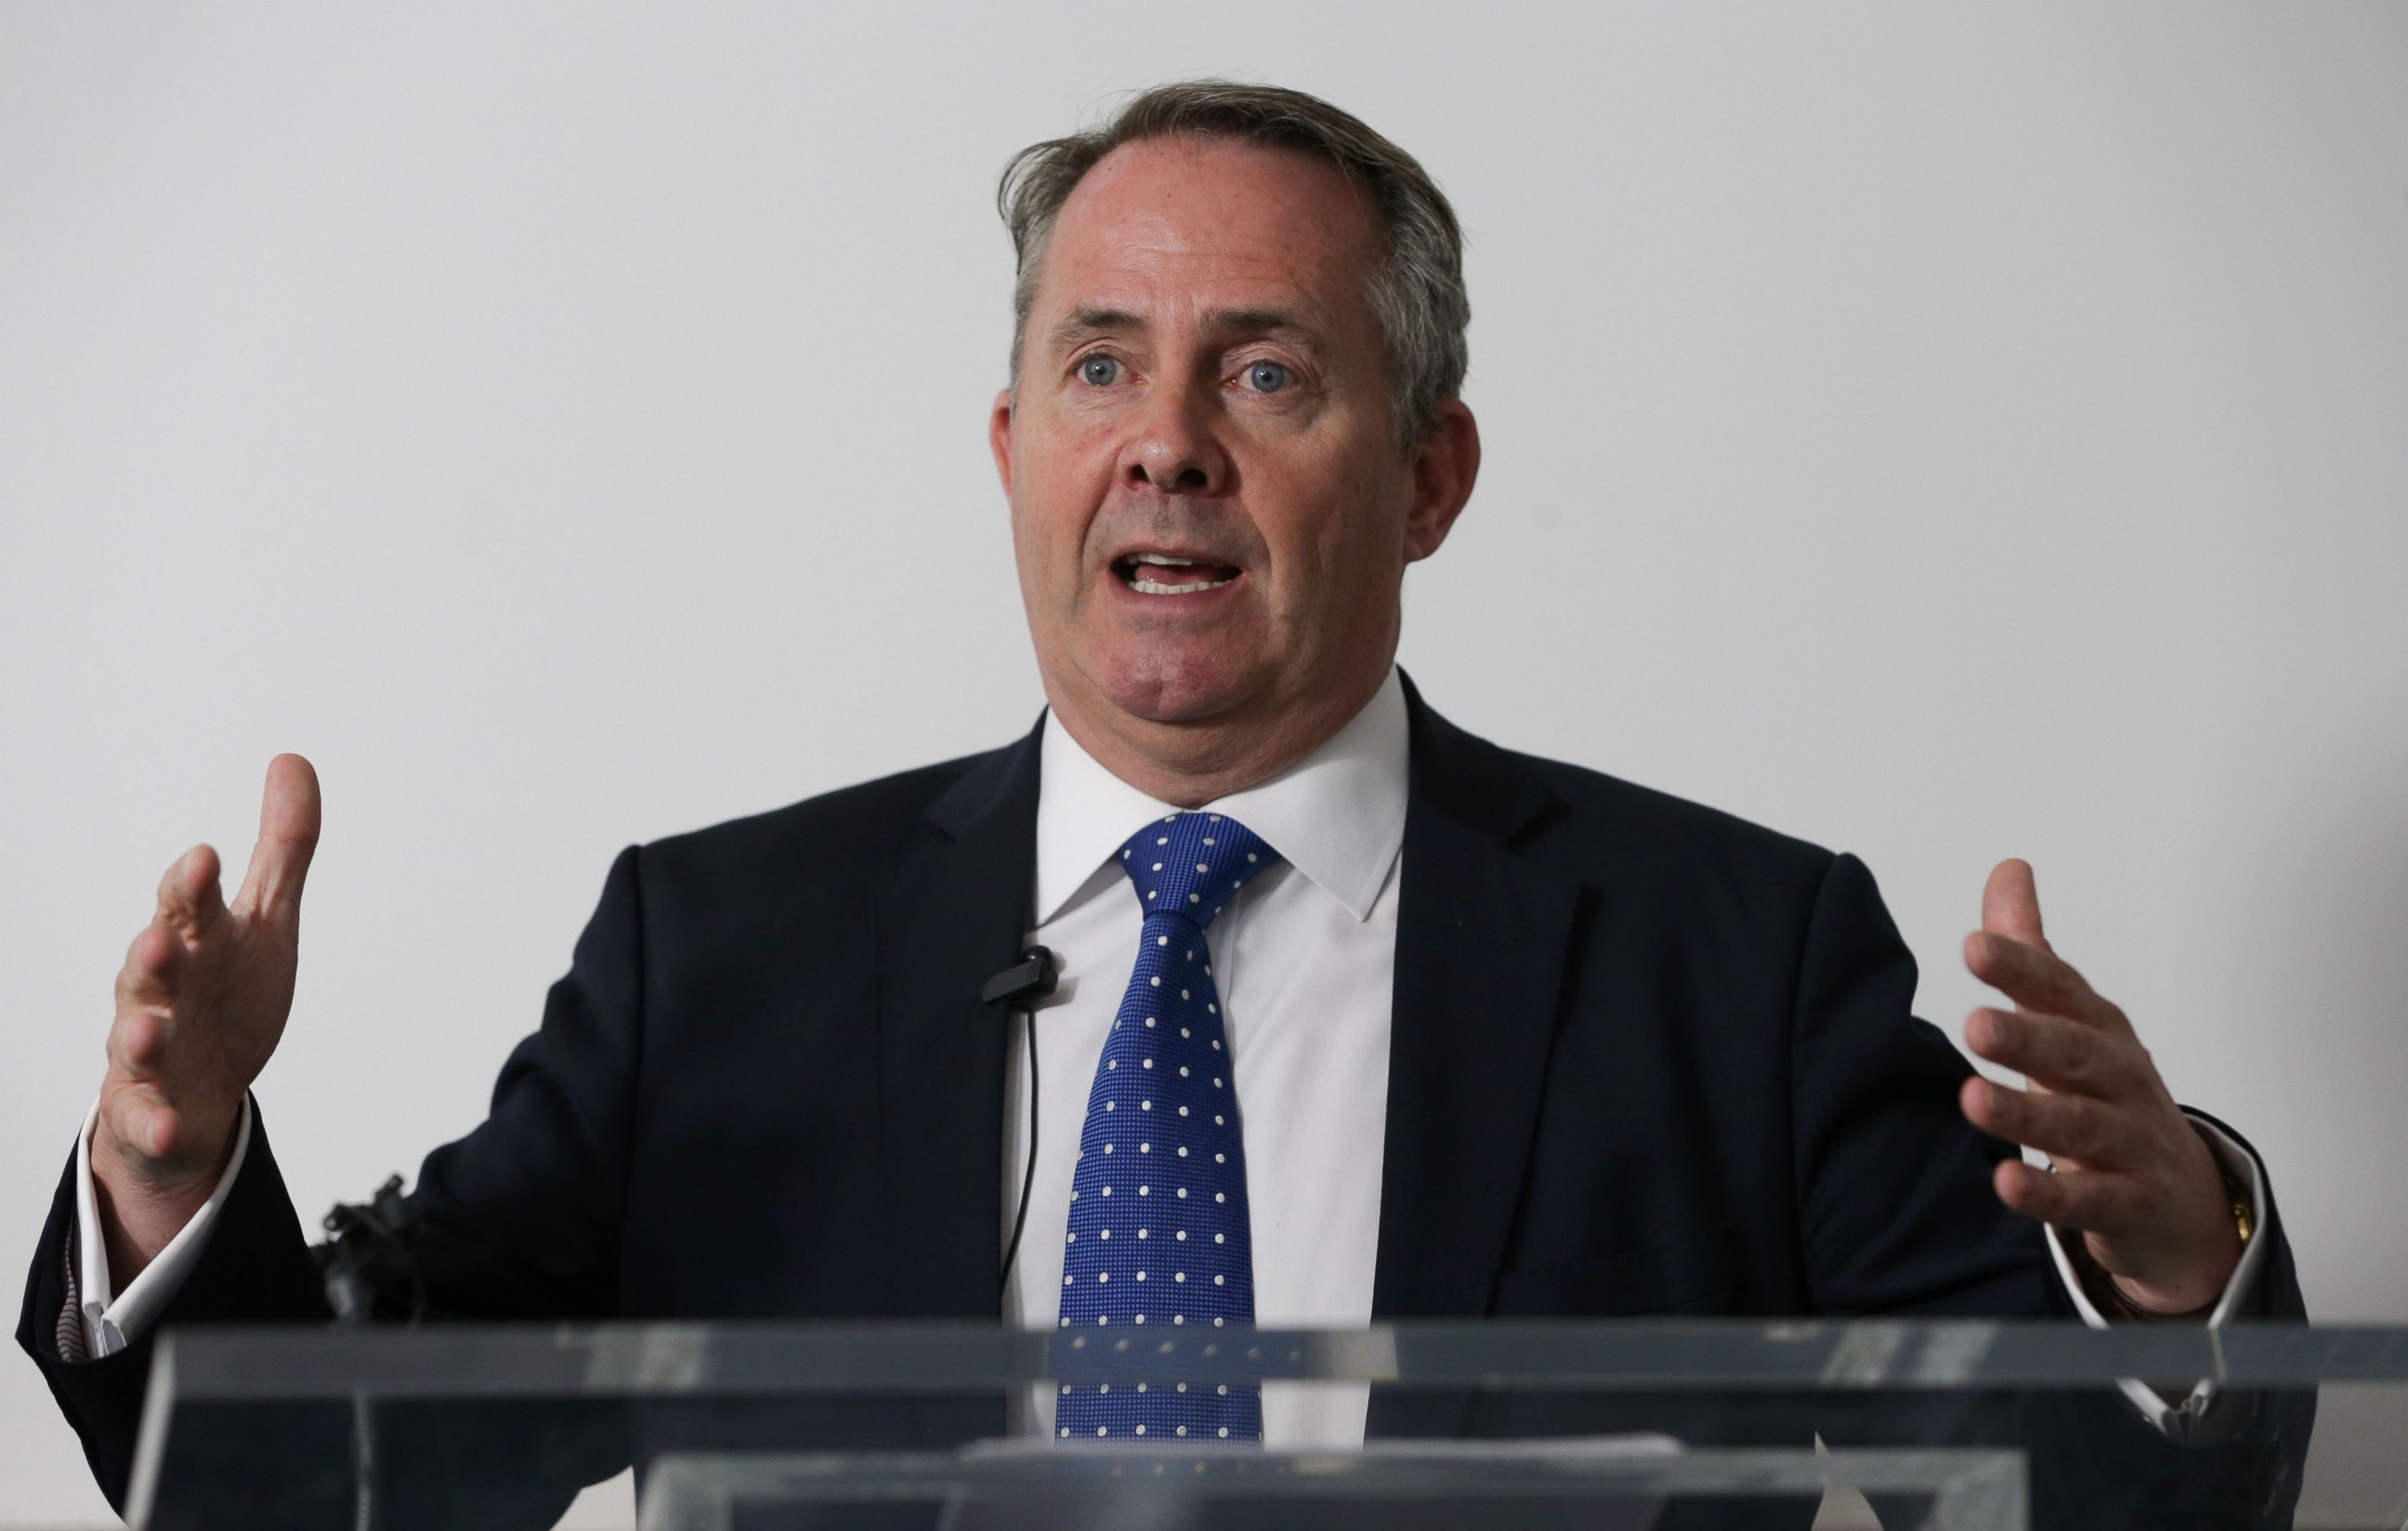 PHOTO: British Conservative Party leadership candidate, Liam Fox, makes a speech as he launches his bid to become the Conservative party leader in London, July 4, 2016. 